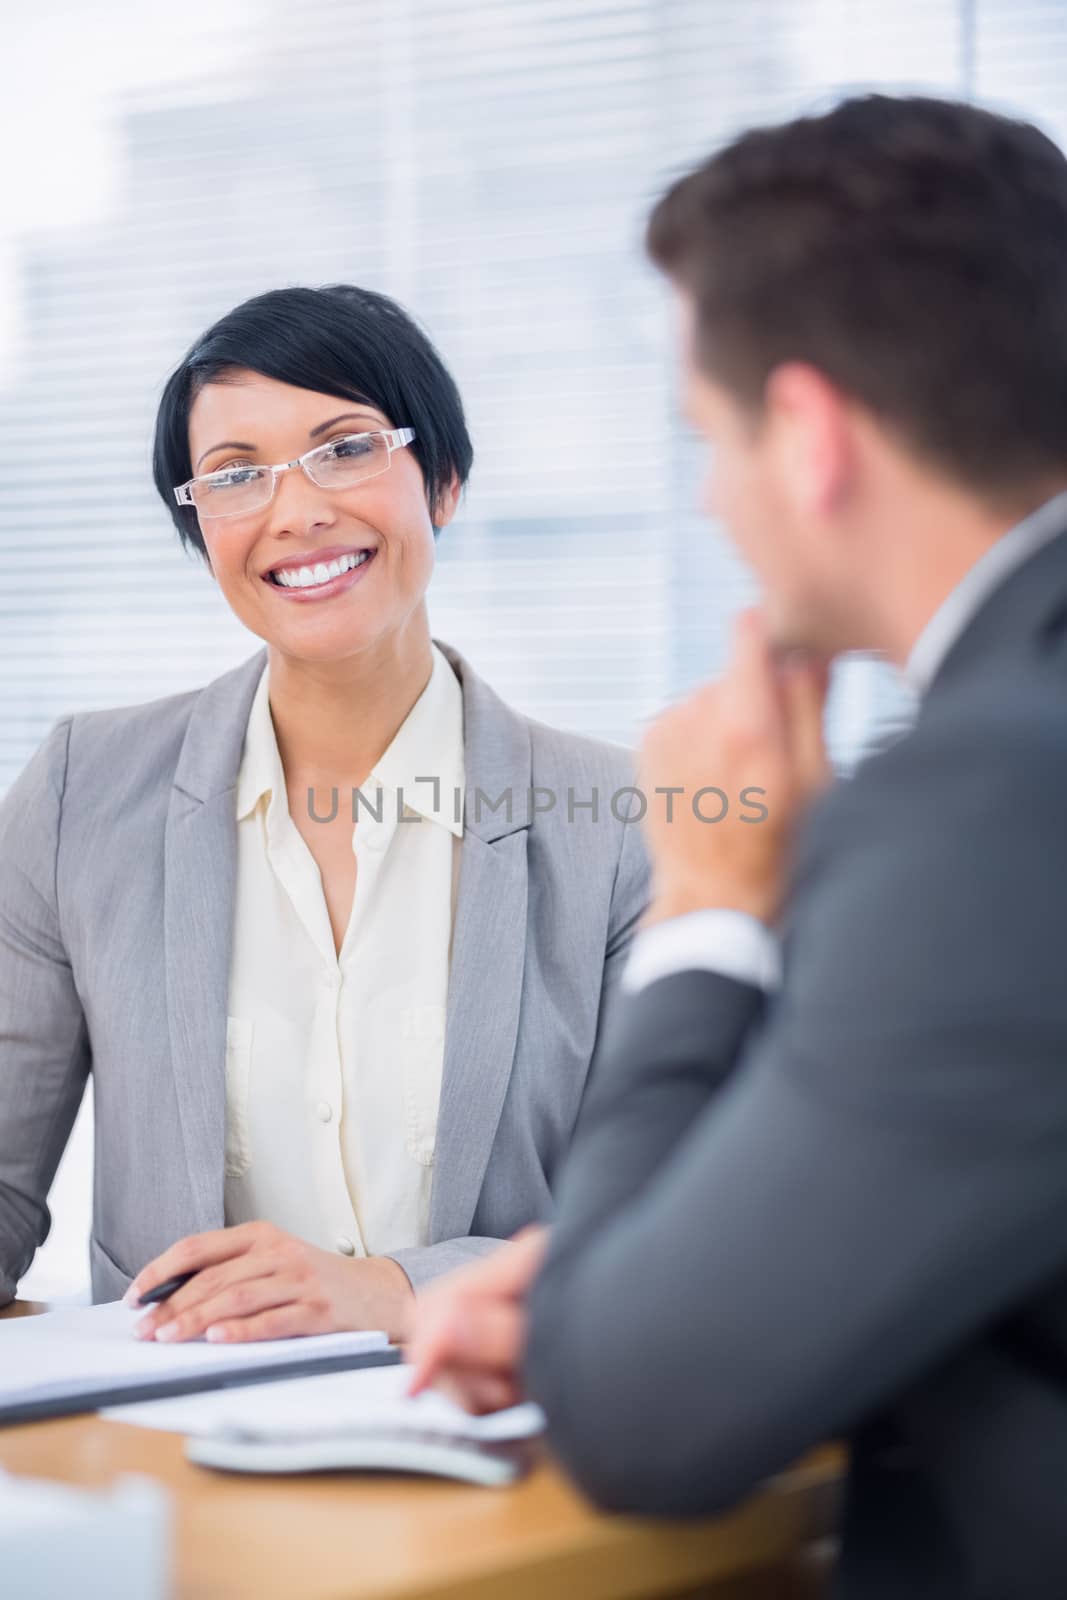 Smartly dressed young man and happy woman in a business meeting at office desk